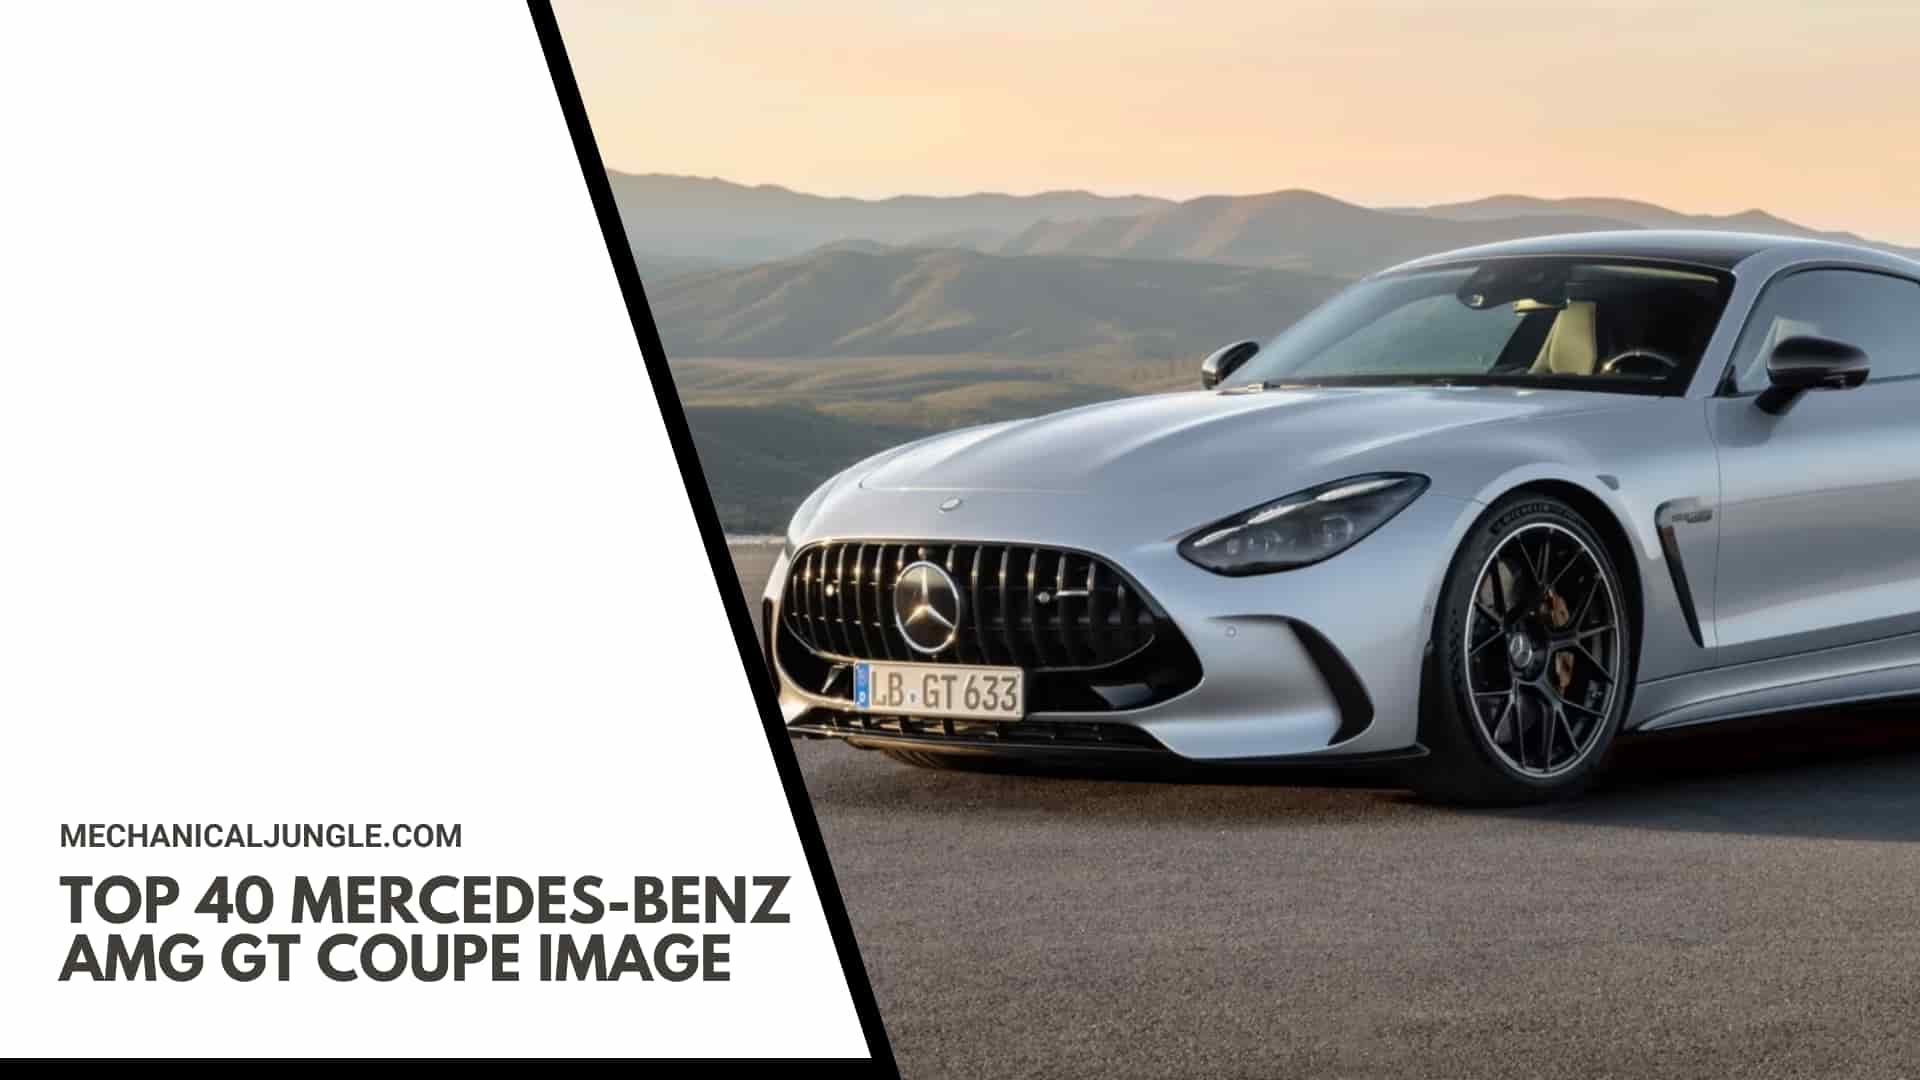 Top 40 Mercedes-Benz AMG GT Coupe Image